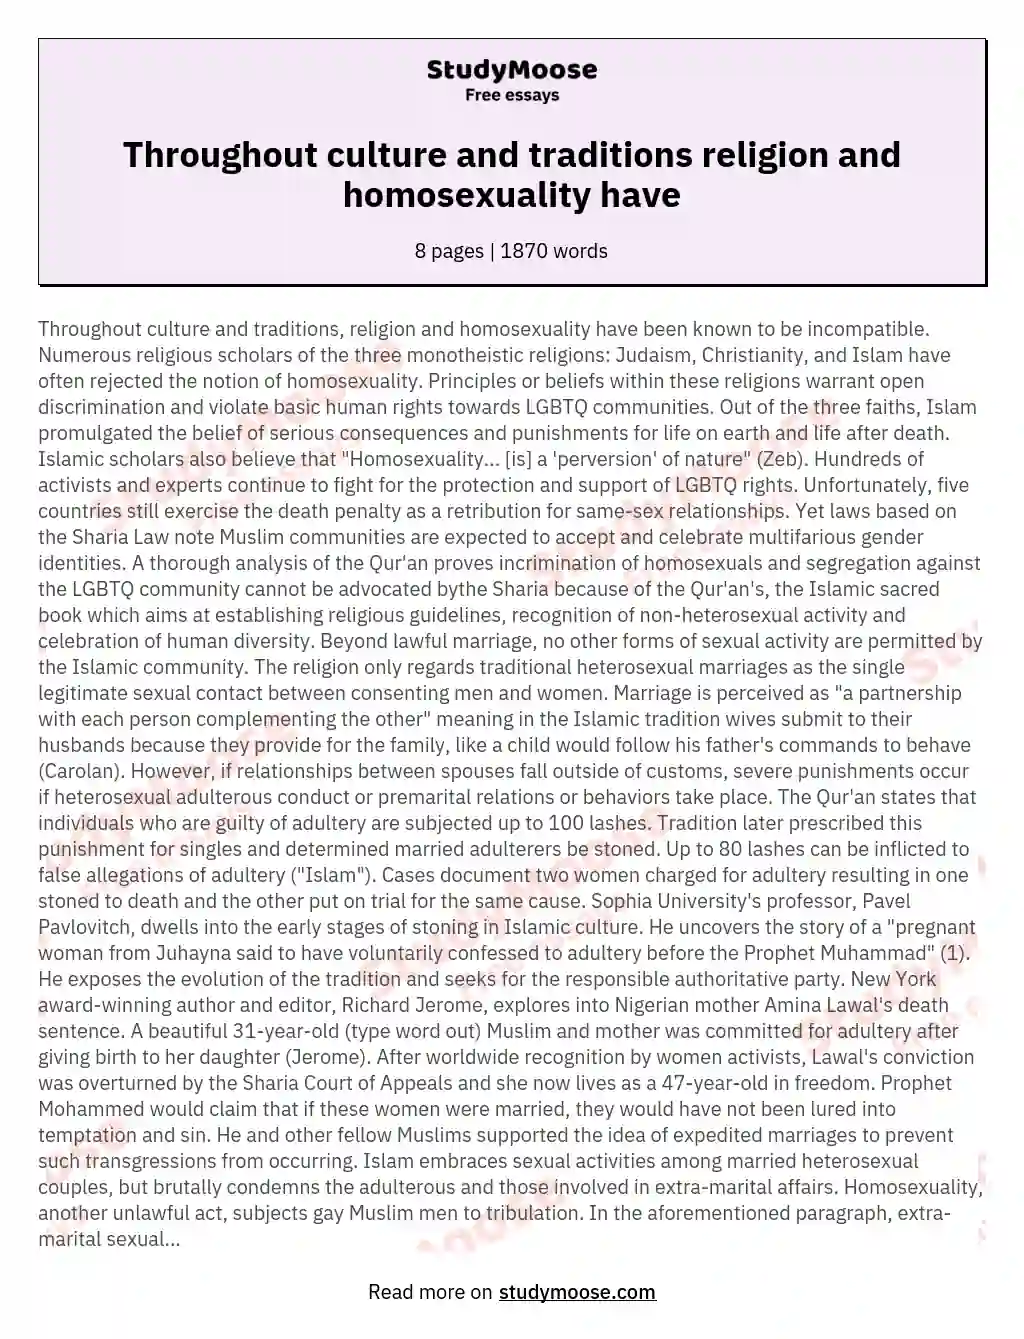 Throughout culture and traditions religion and homosexuality have essay